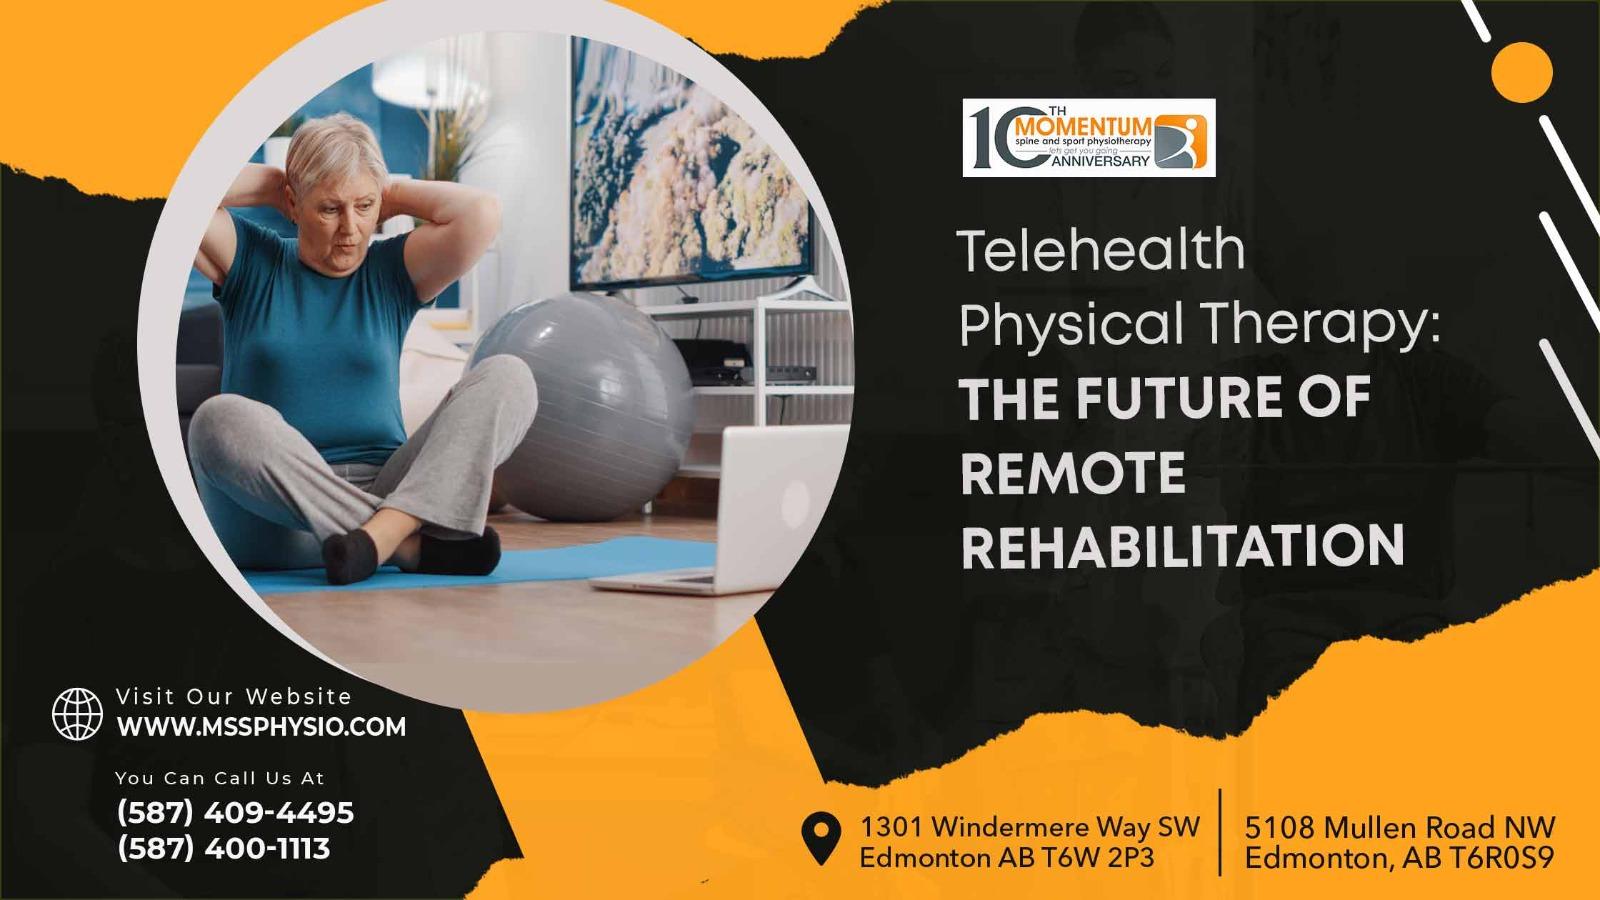 Telehealth Physical Therapy The Future of Remote Rehabilitation